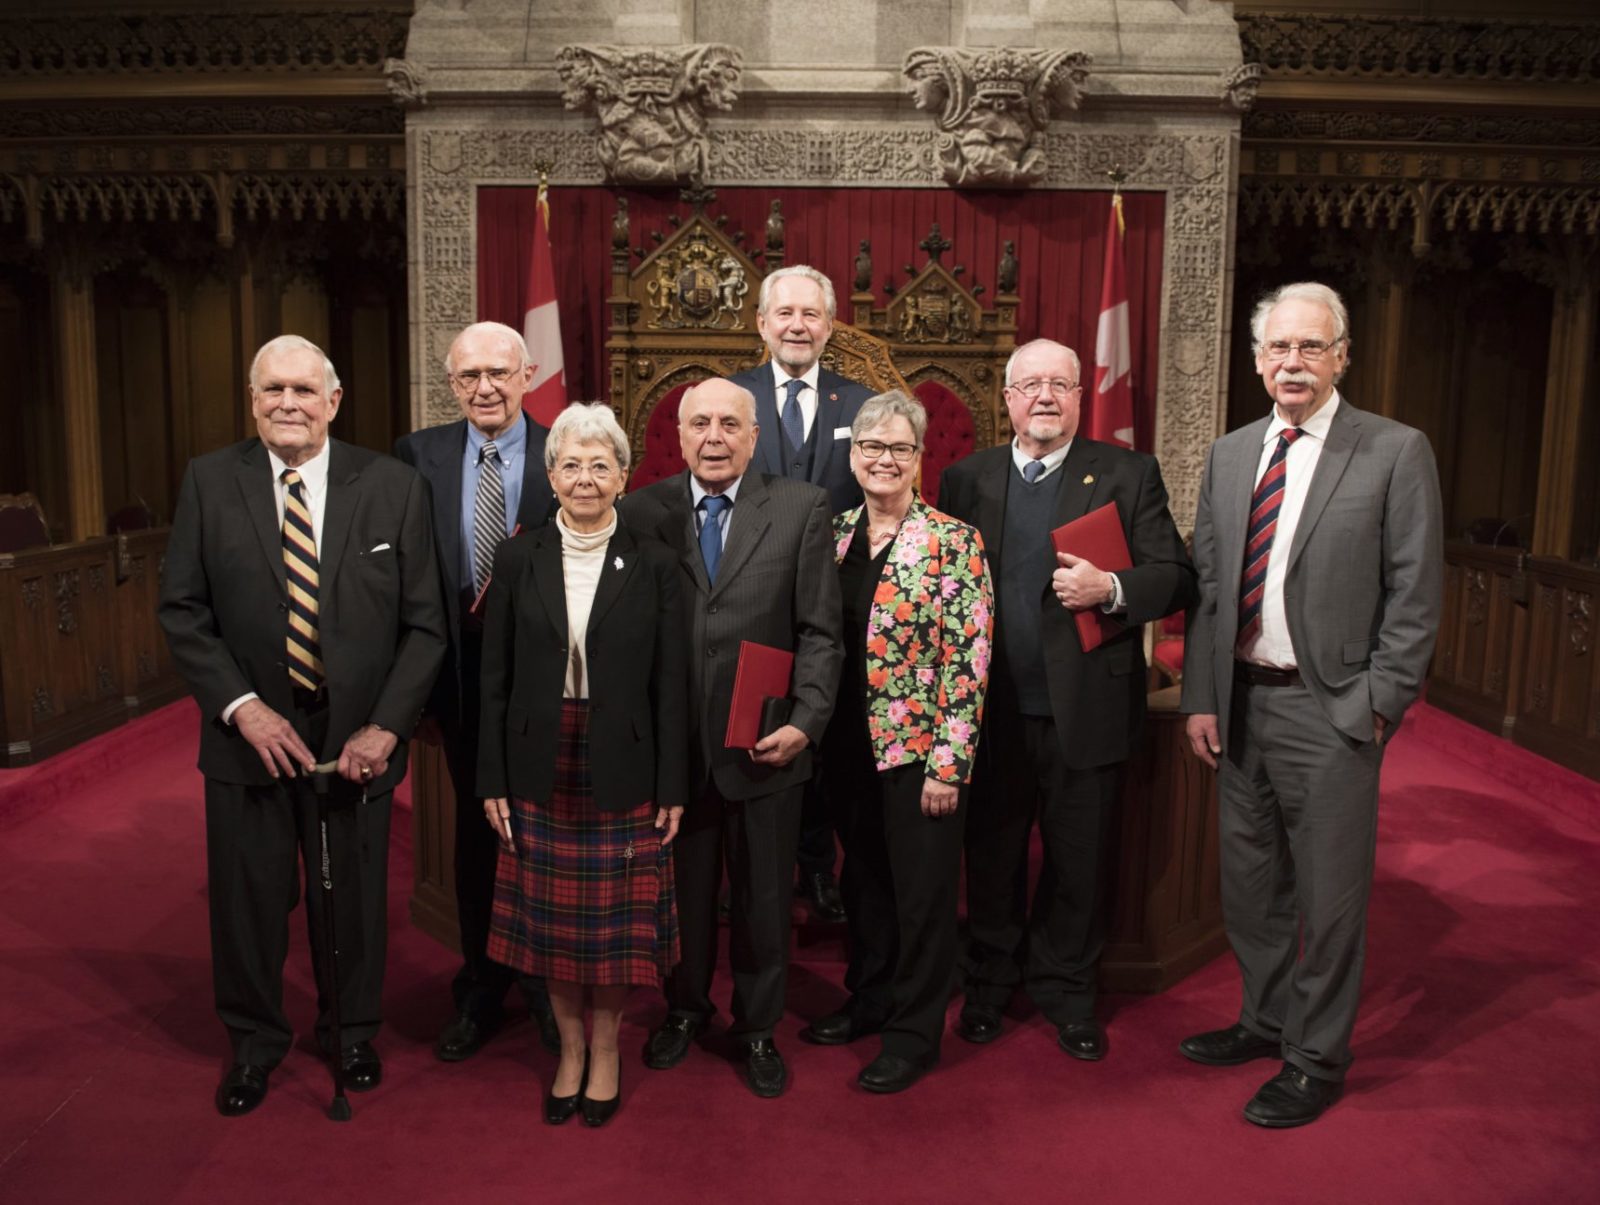 Senator Harder awards Canadians for work with immigrants and refugees